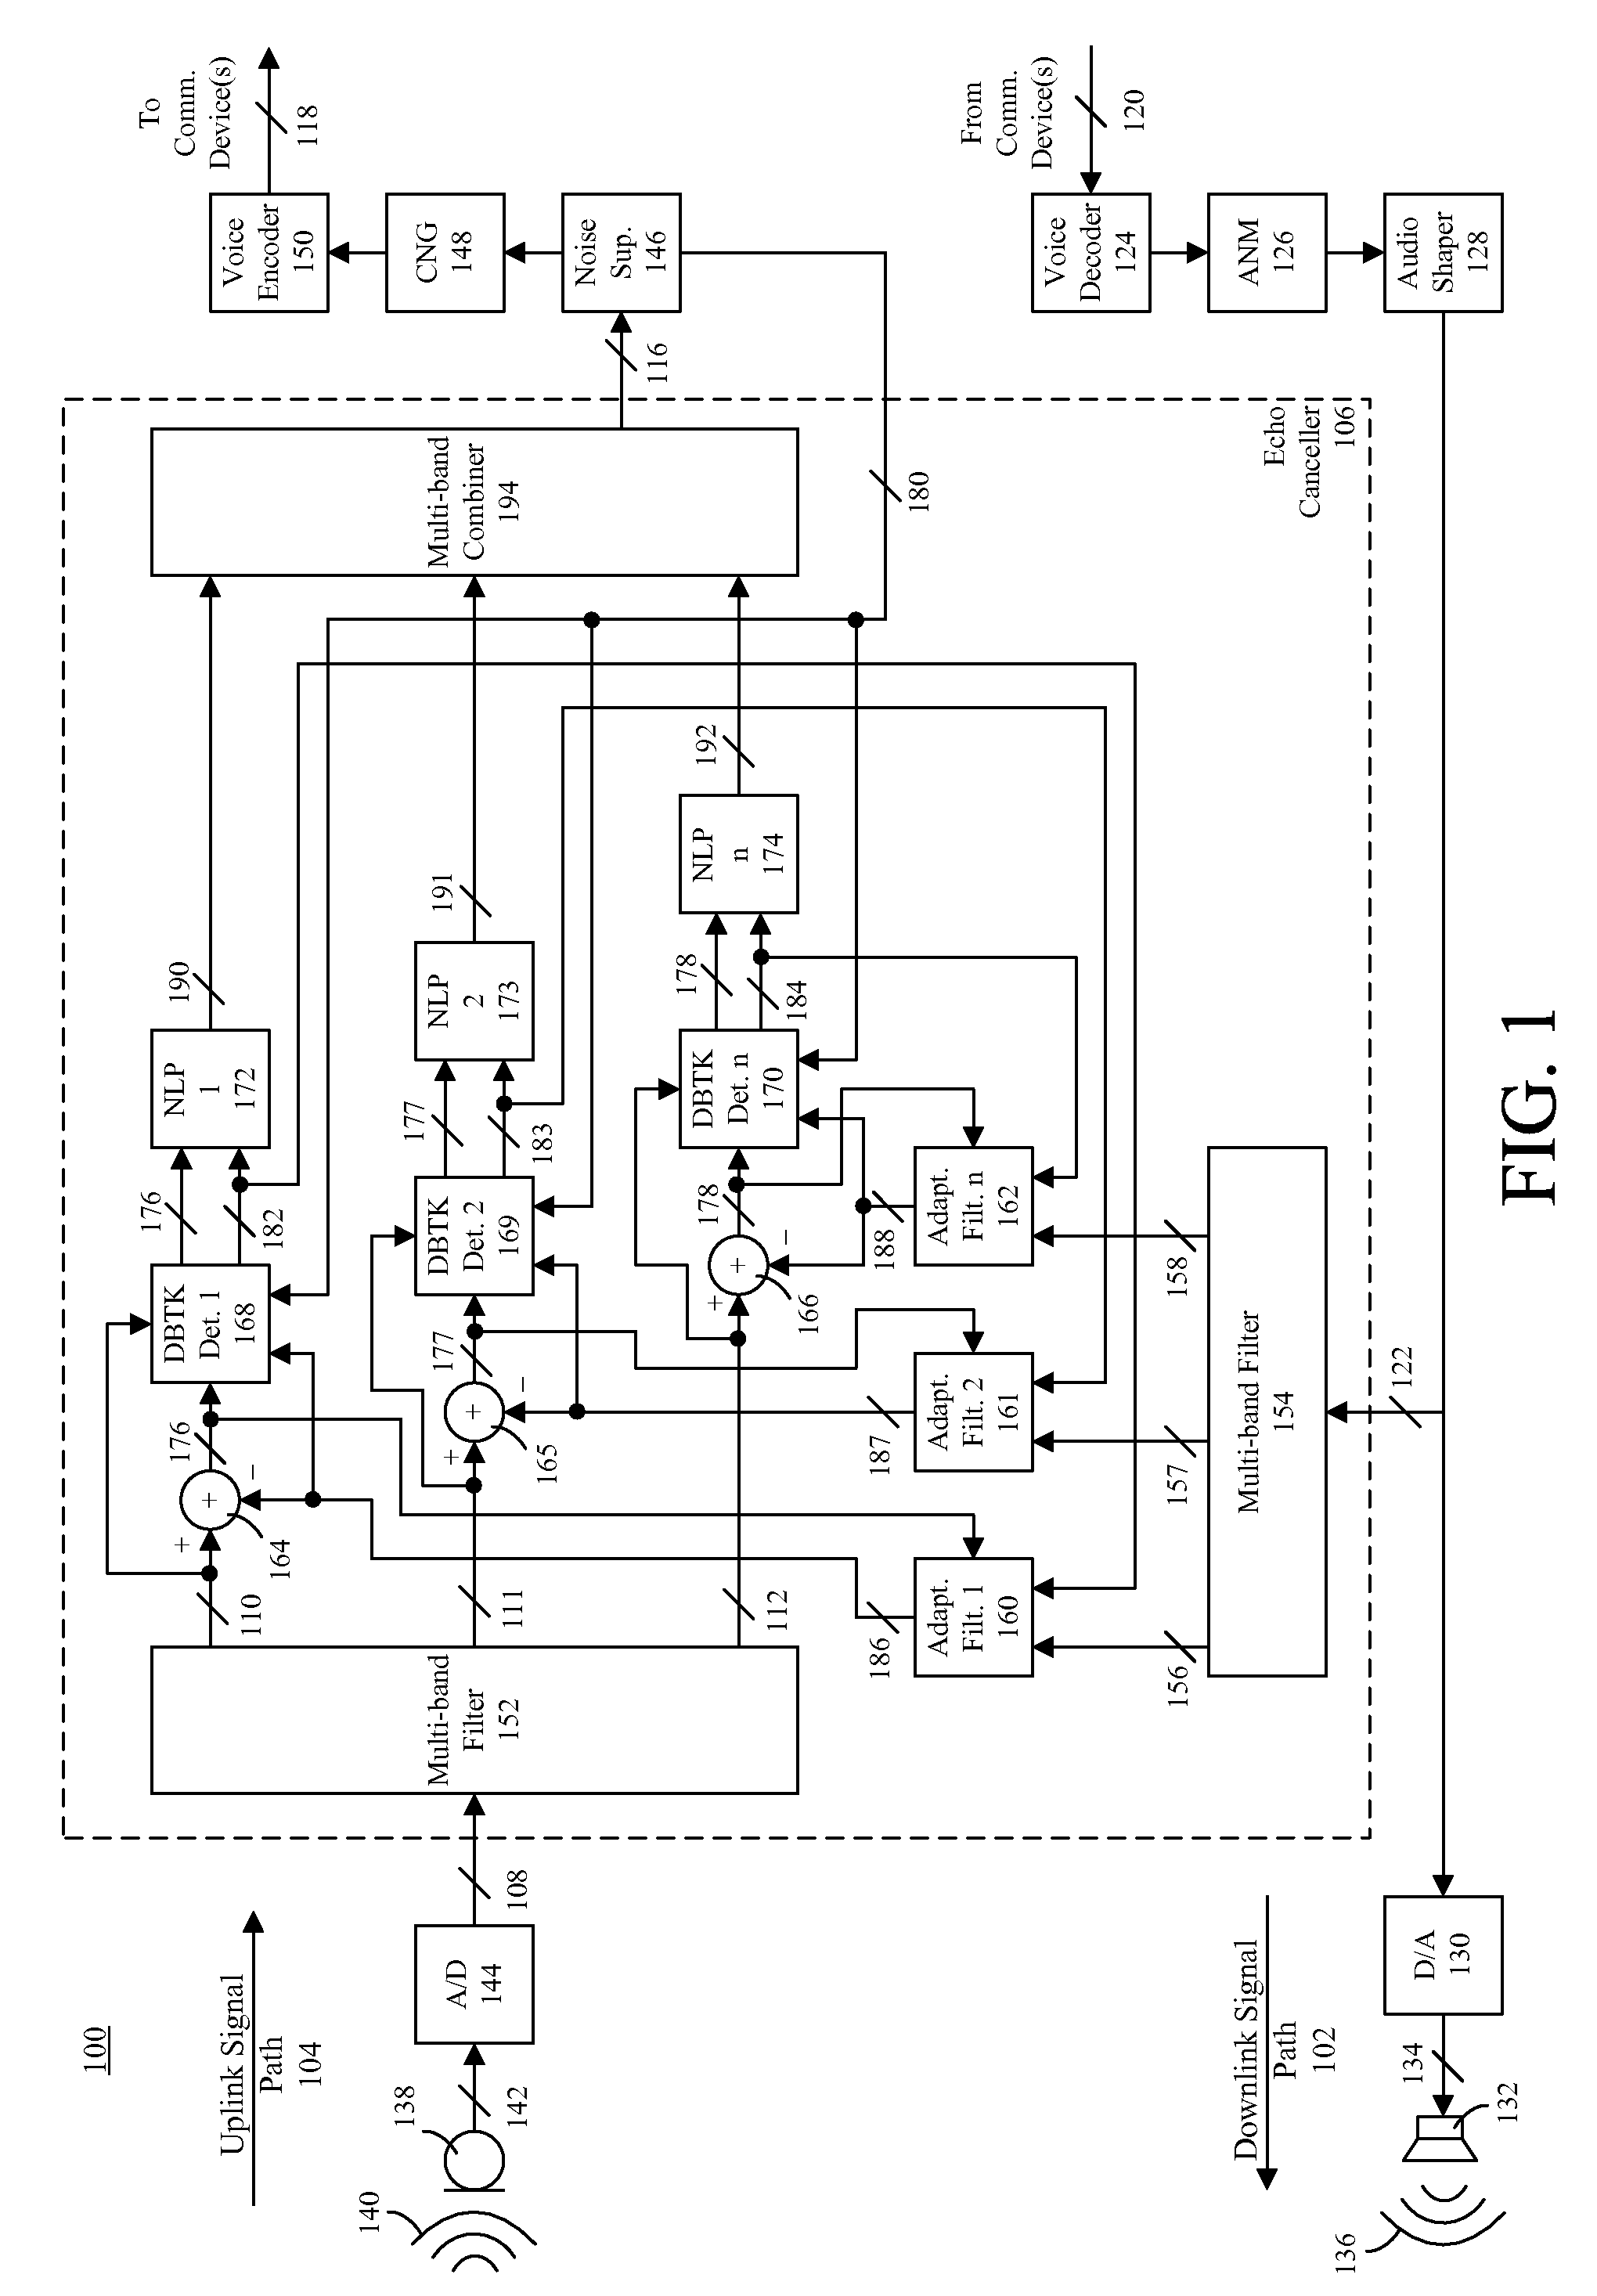 Acoustic echo canceller using multi-band nonlinear processing